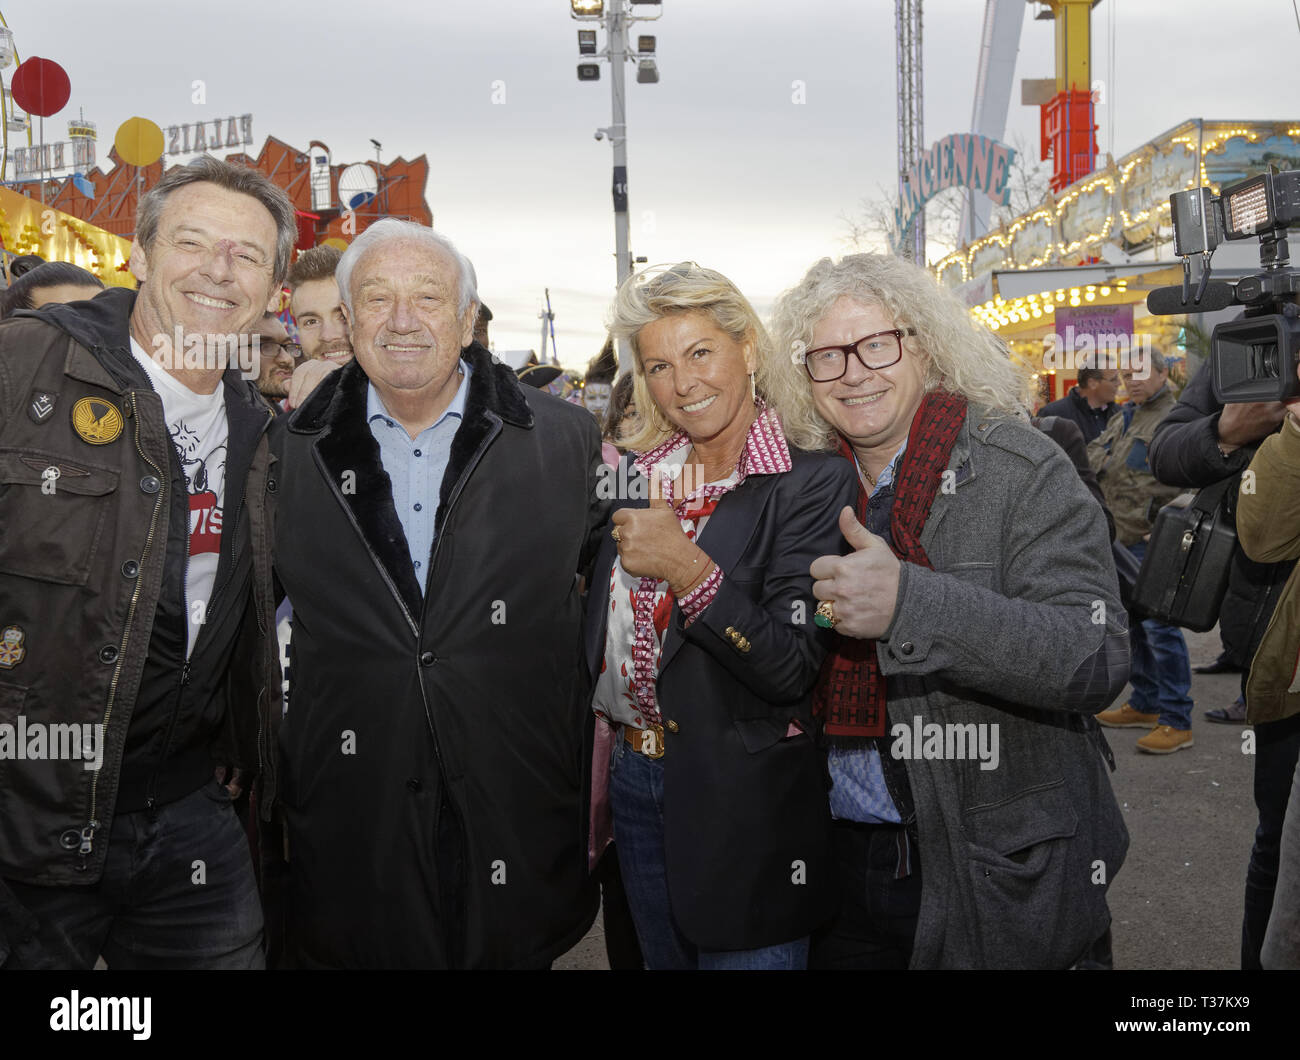 Jean Pierre Rougé High Resolution Stock Photography and Images - Alamy